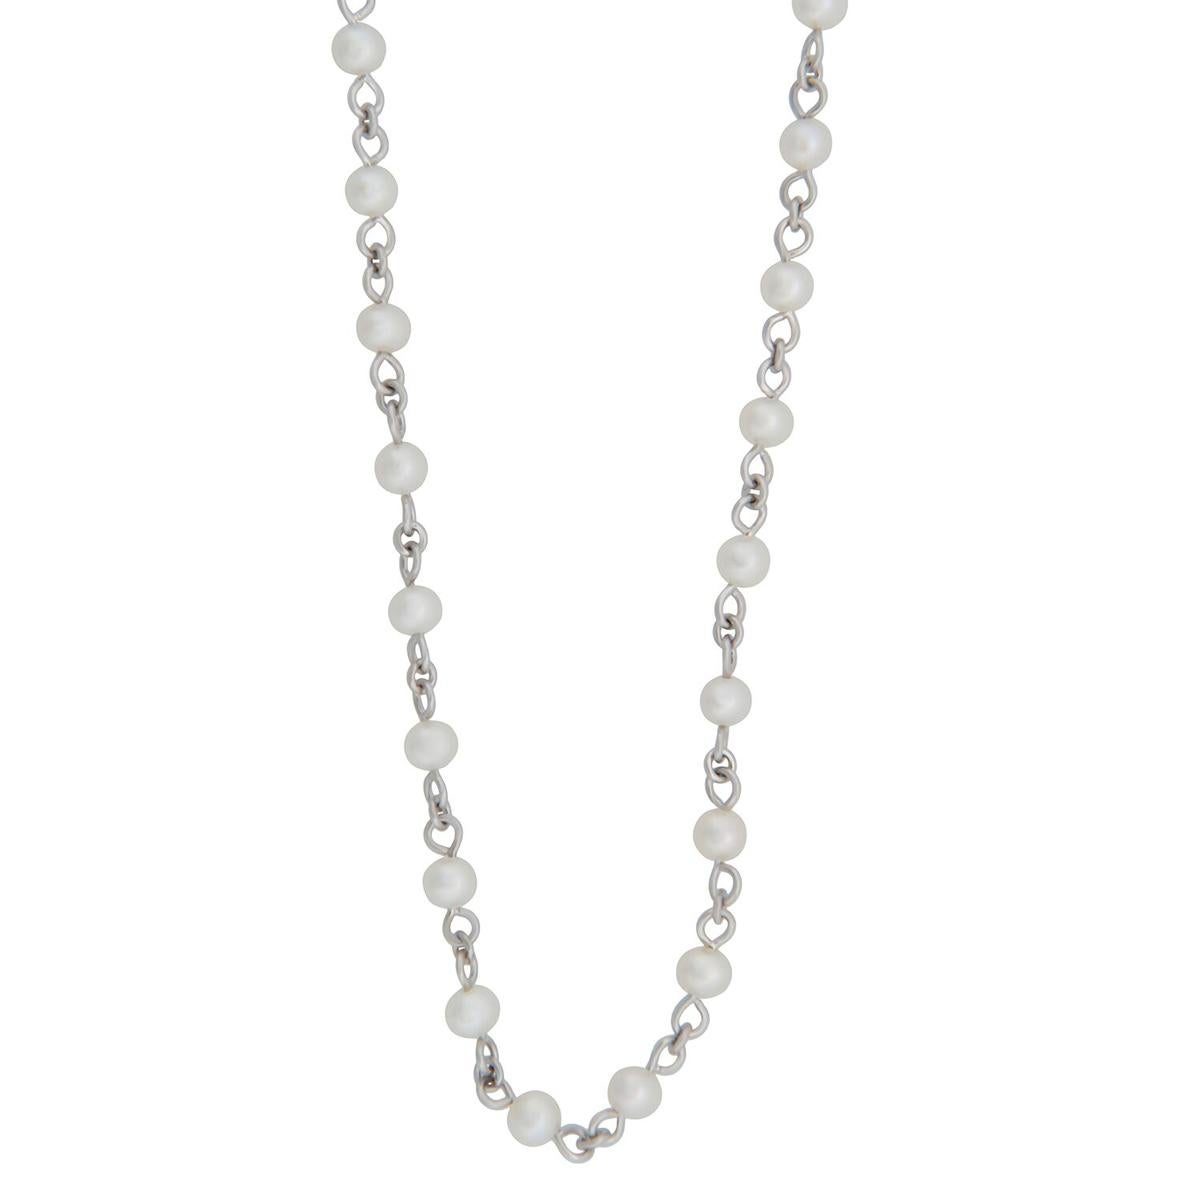 A fabulous necklace by Mimi Milano featuring 3.5mm cultured freshwater pearls set in 18k white gold. The necklace measures 16